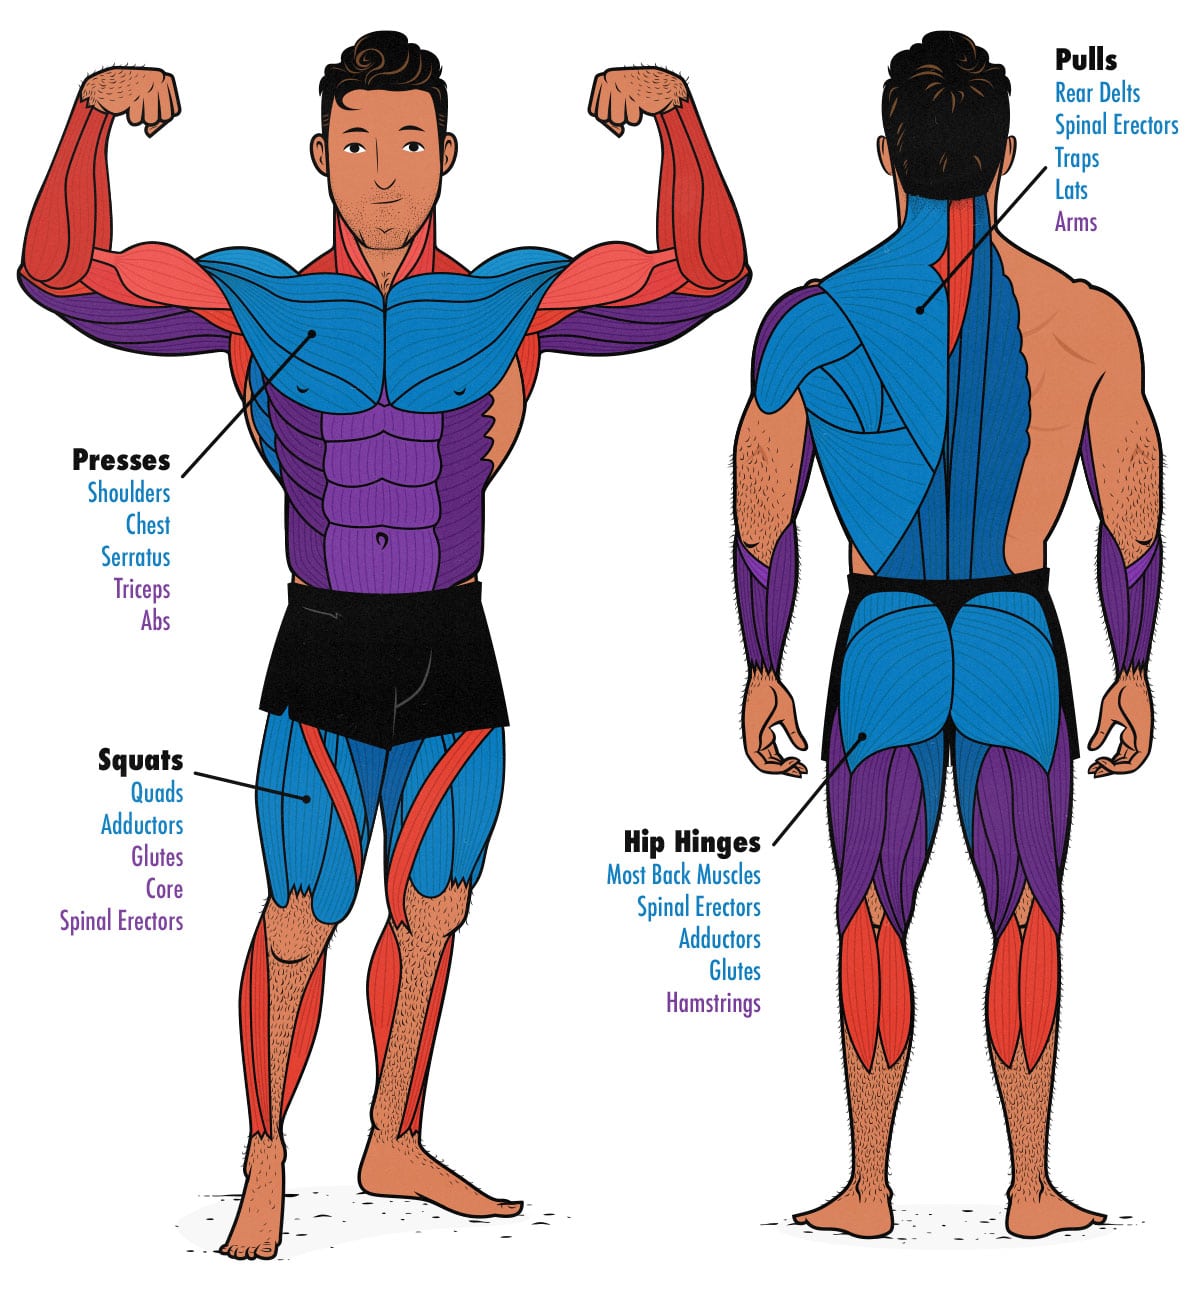 Diagram showing the muscles worked by compound lifts when lifting weights.